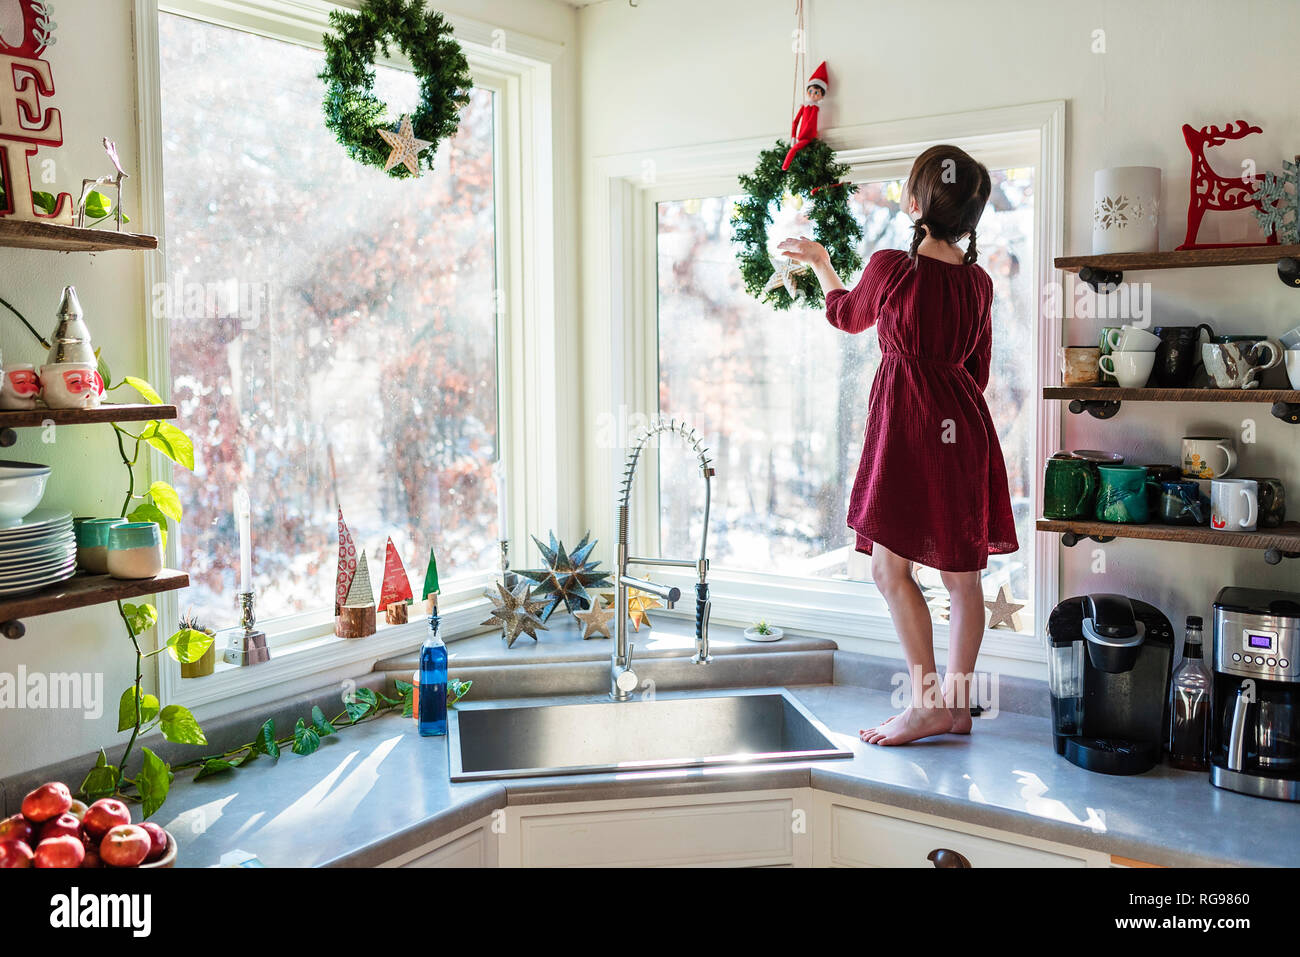 Girl standing on a kitchen worktop putting up Christmas decorations Stock Photo